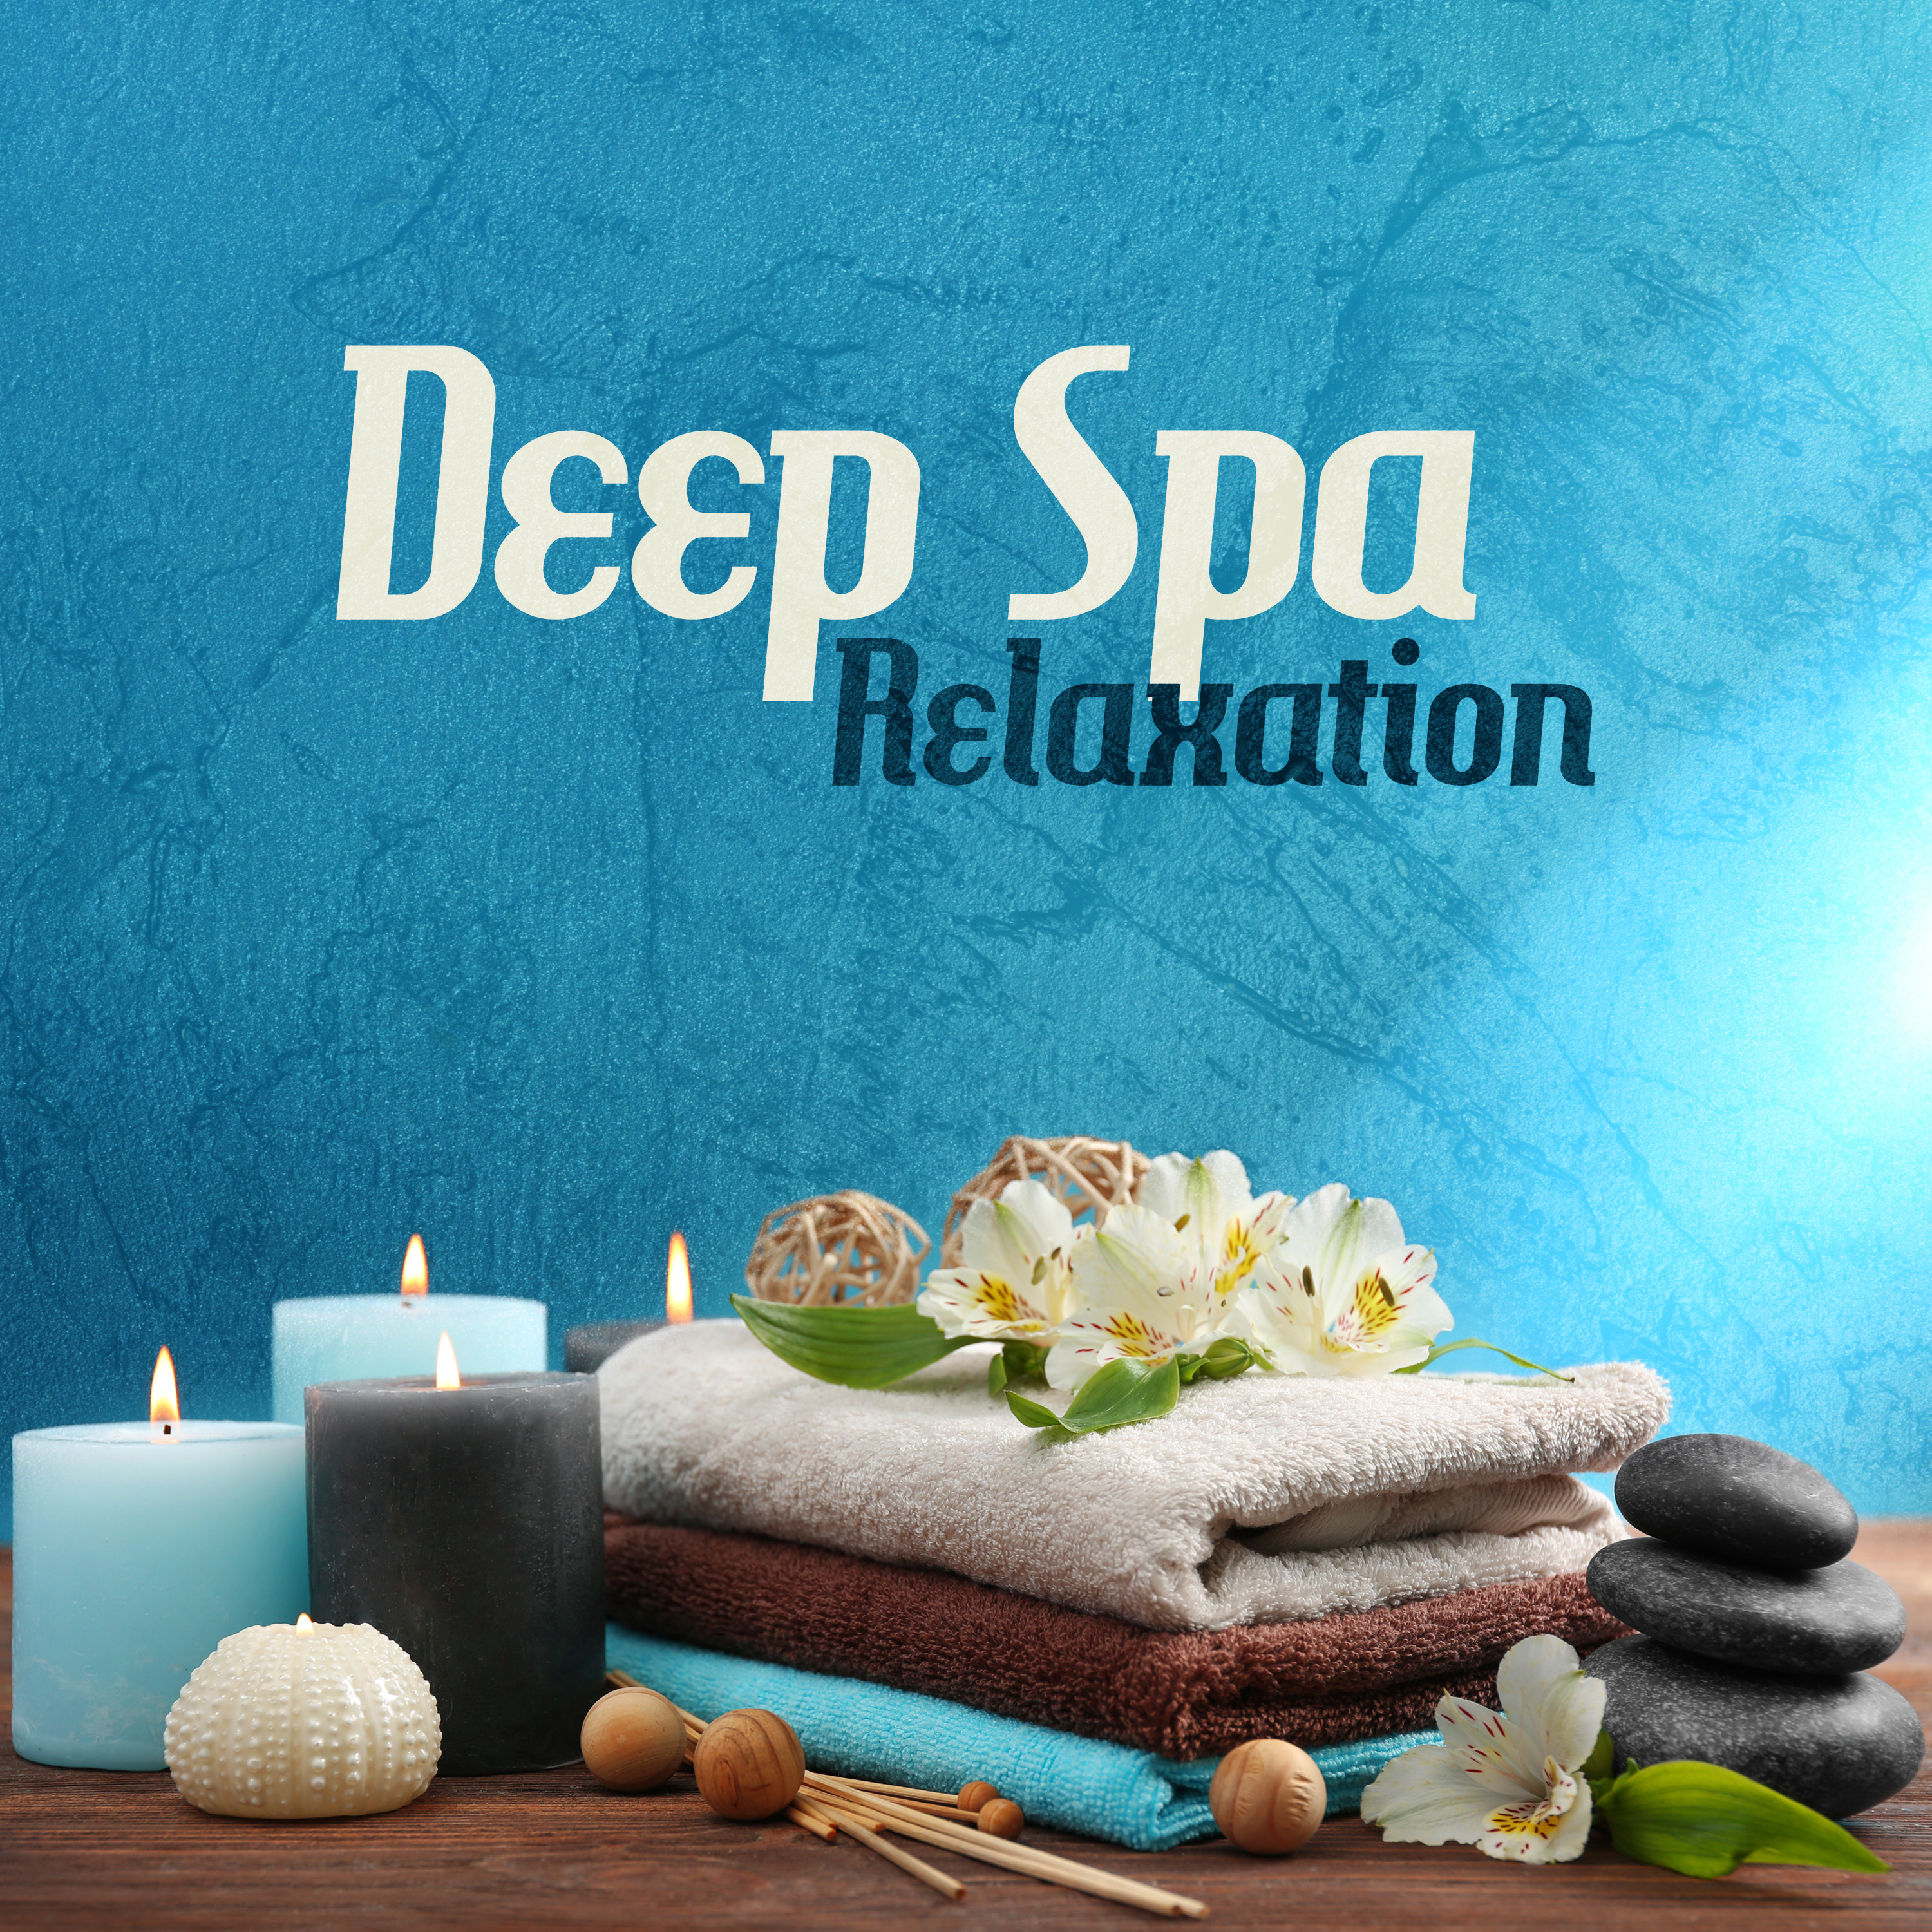 Deep Spa Relaxation (Pure Wellness, Positive Vibration, Beauty Day, Holiday Experiences, Massage, Healing Tone, Spa Therapy)